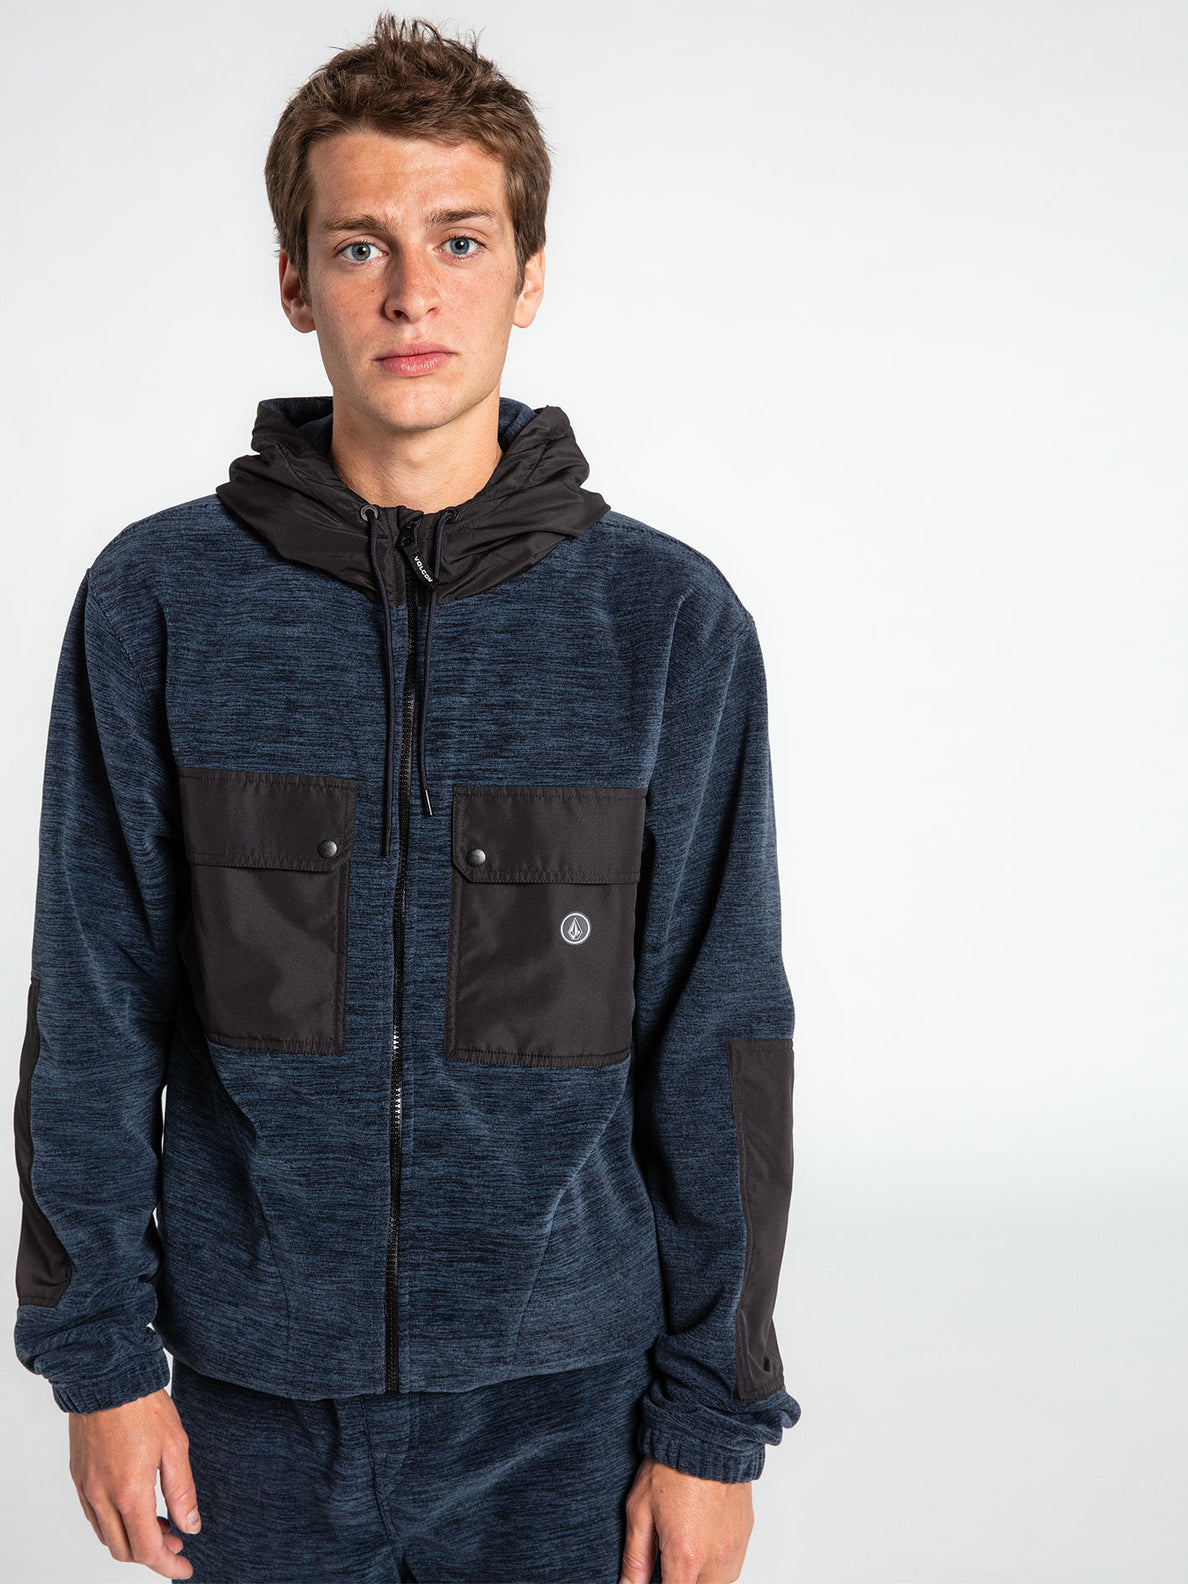 Yzzolater Lined Zip Hoodie - Navy (A5832100_NVY) [1]